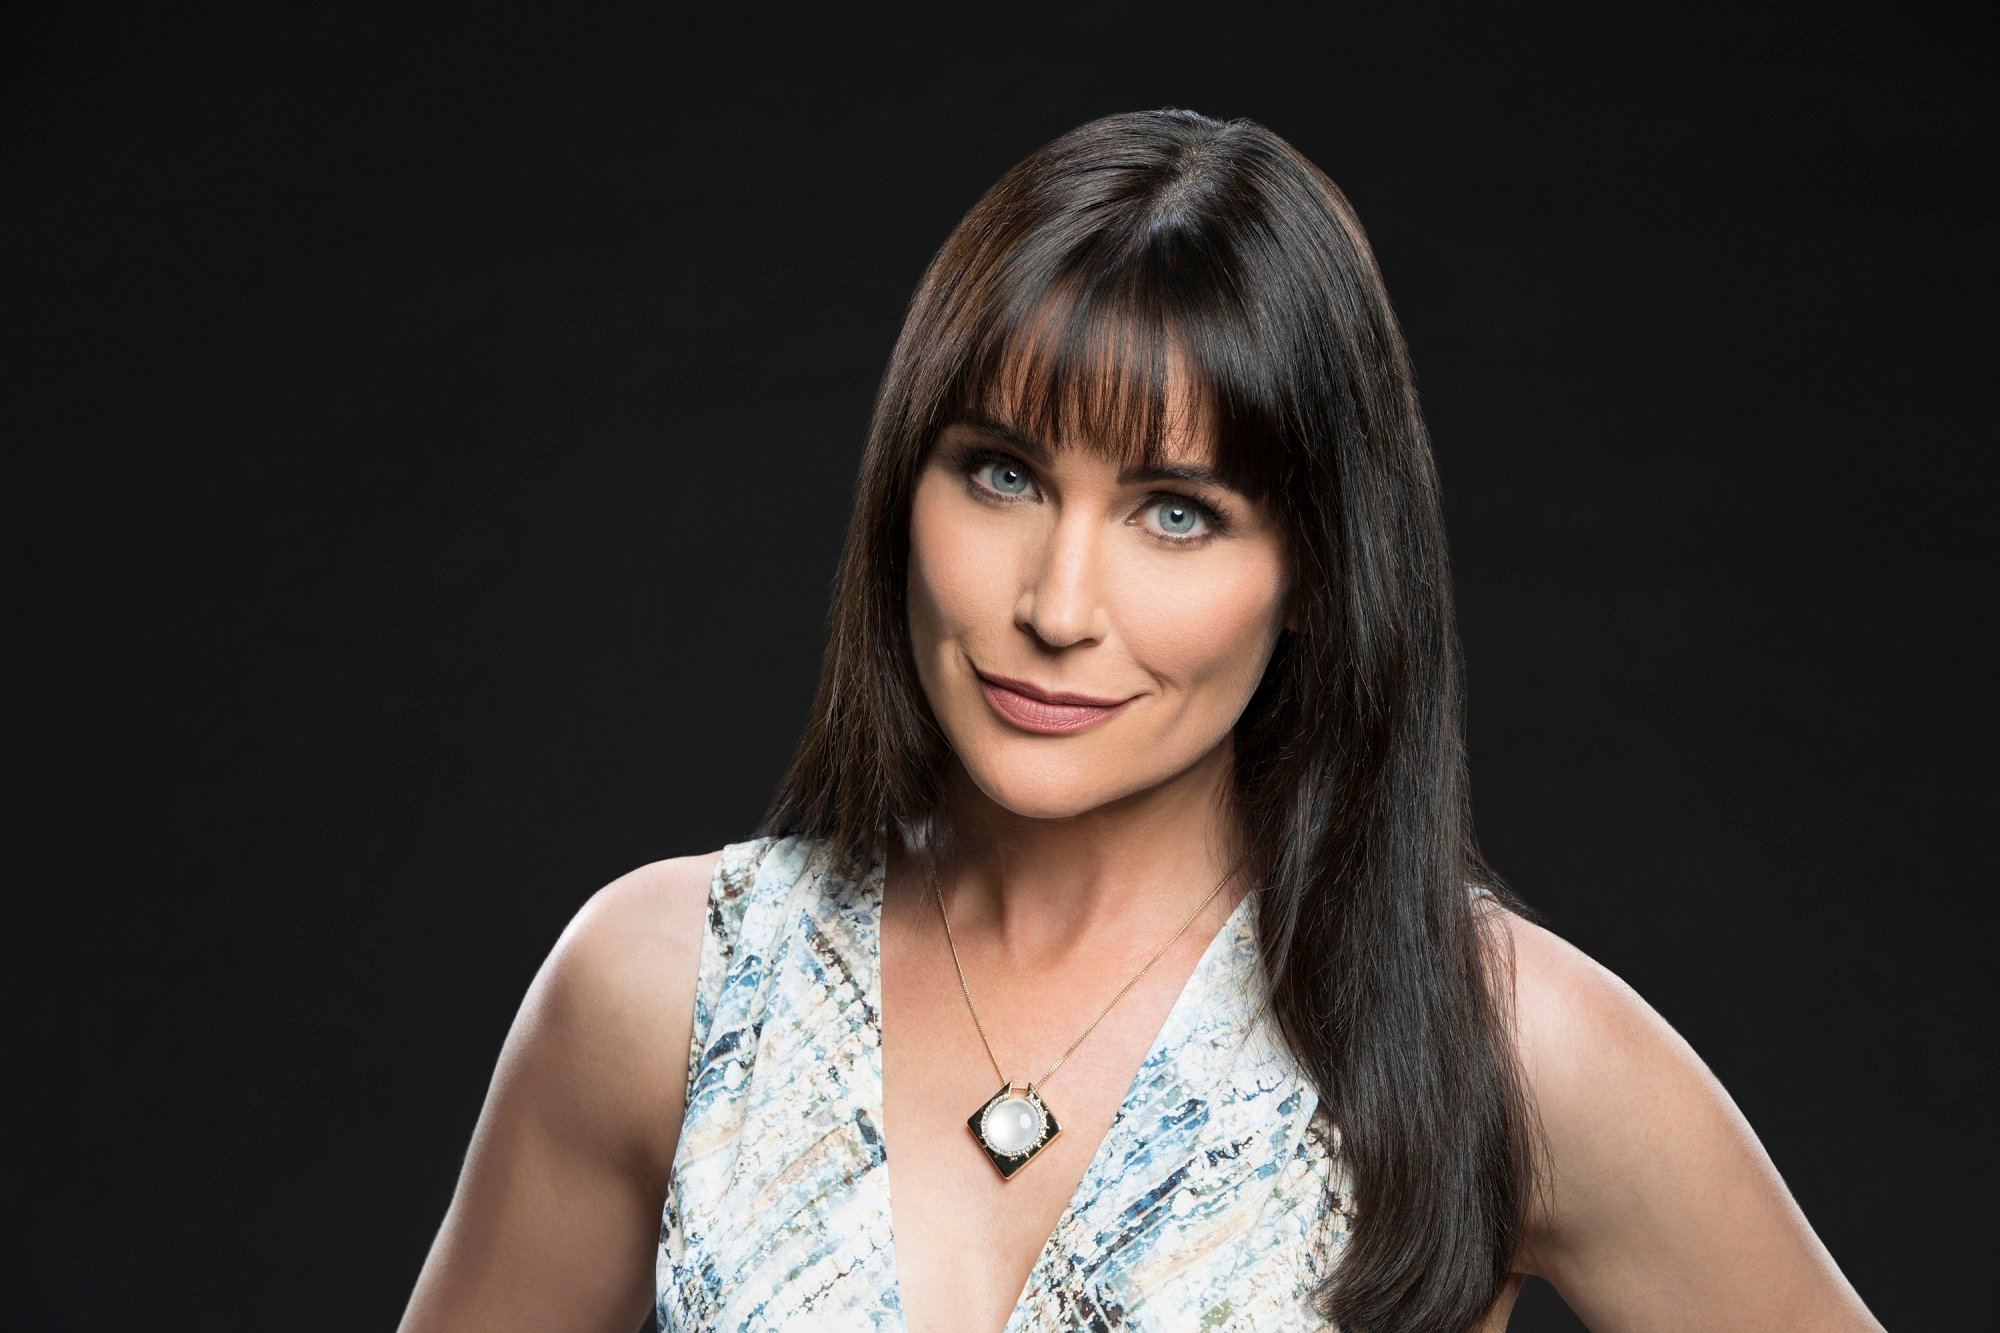 The Bold and the Beautiful spoilers this week focus on Quinn, played by Rena Sofer, pictured here